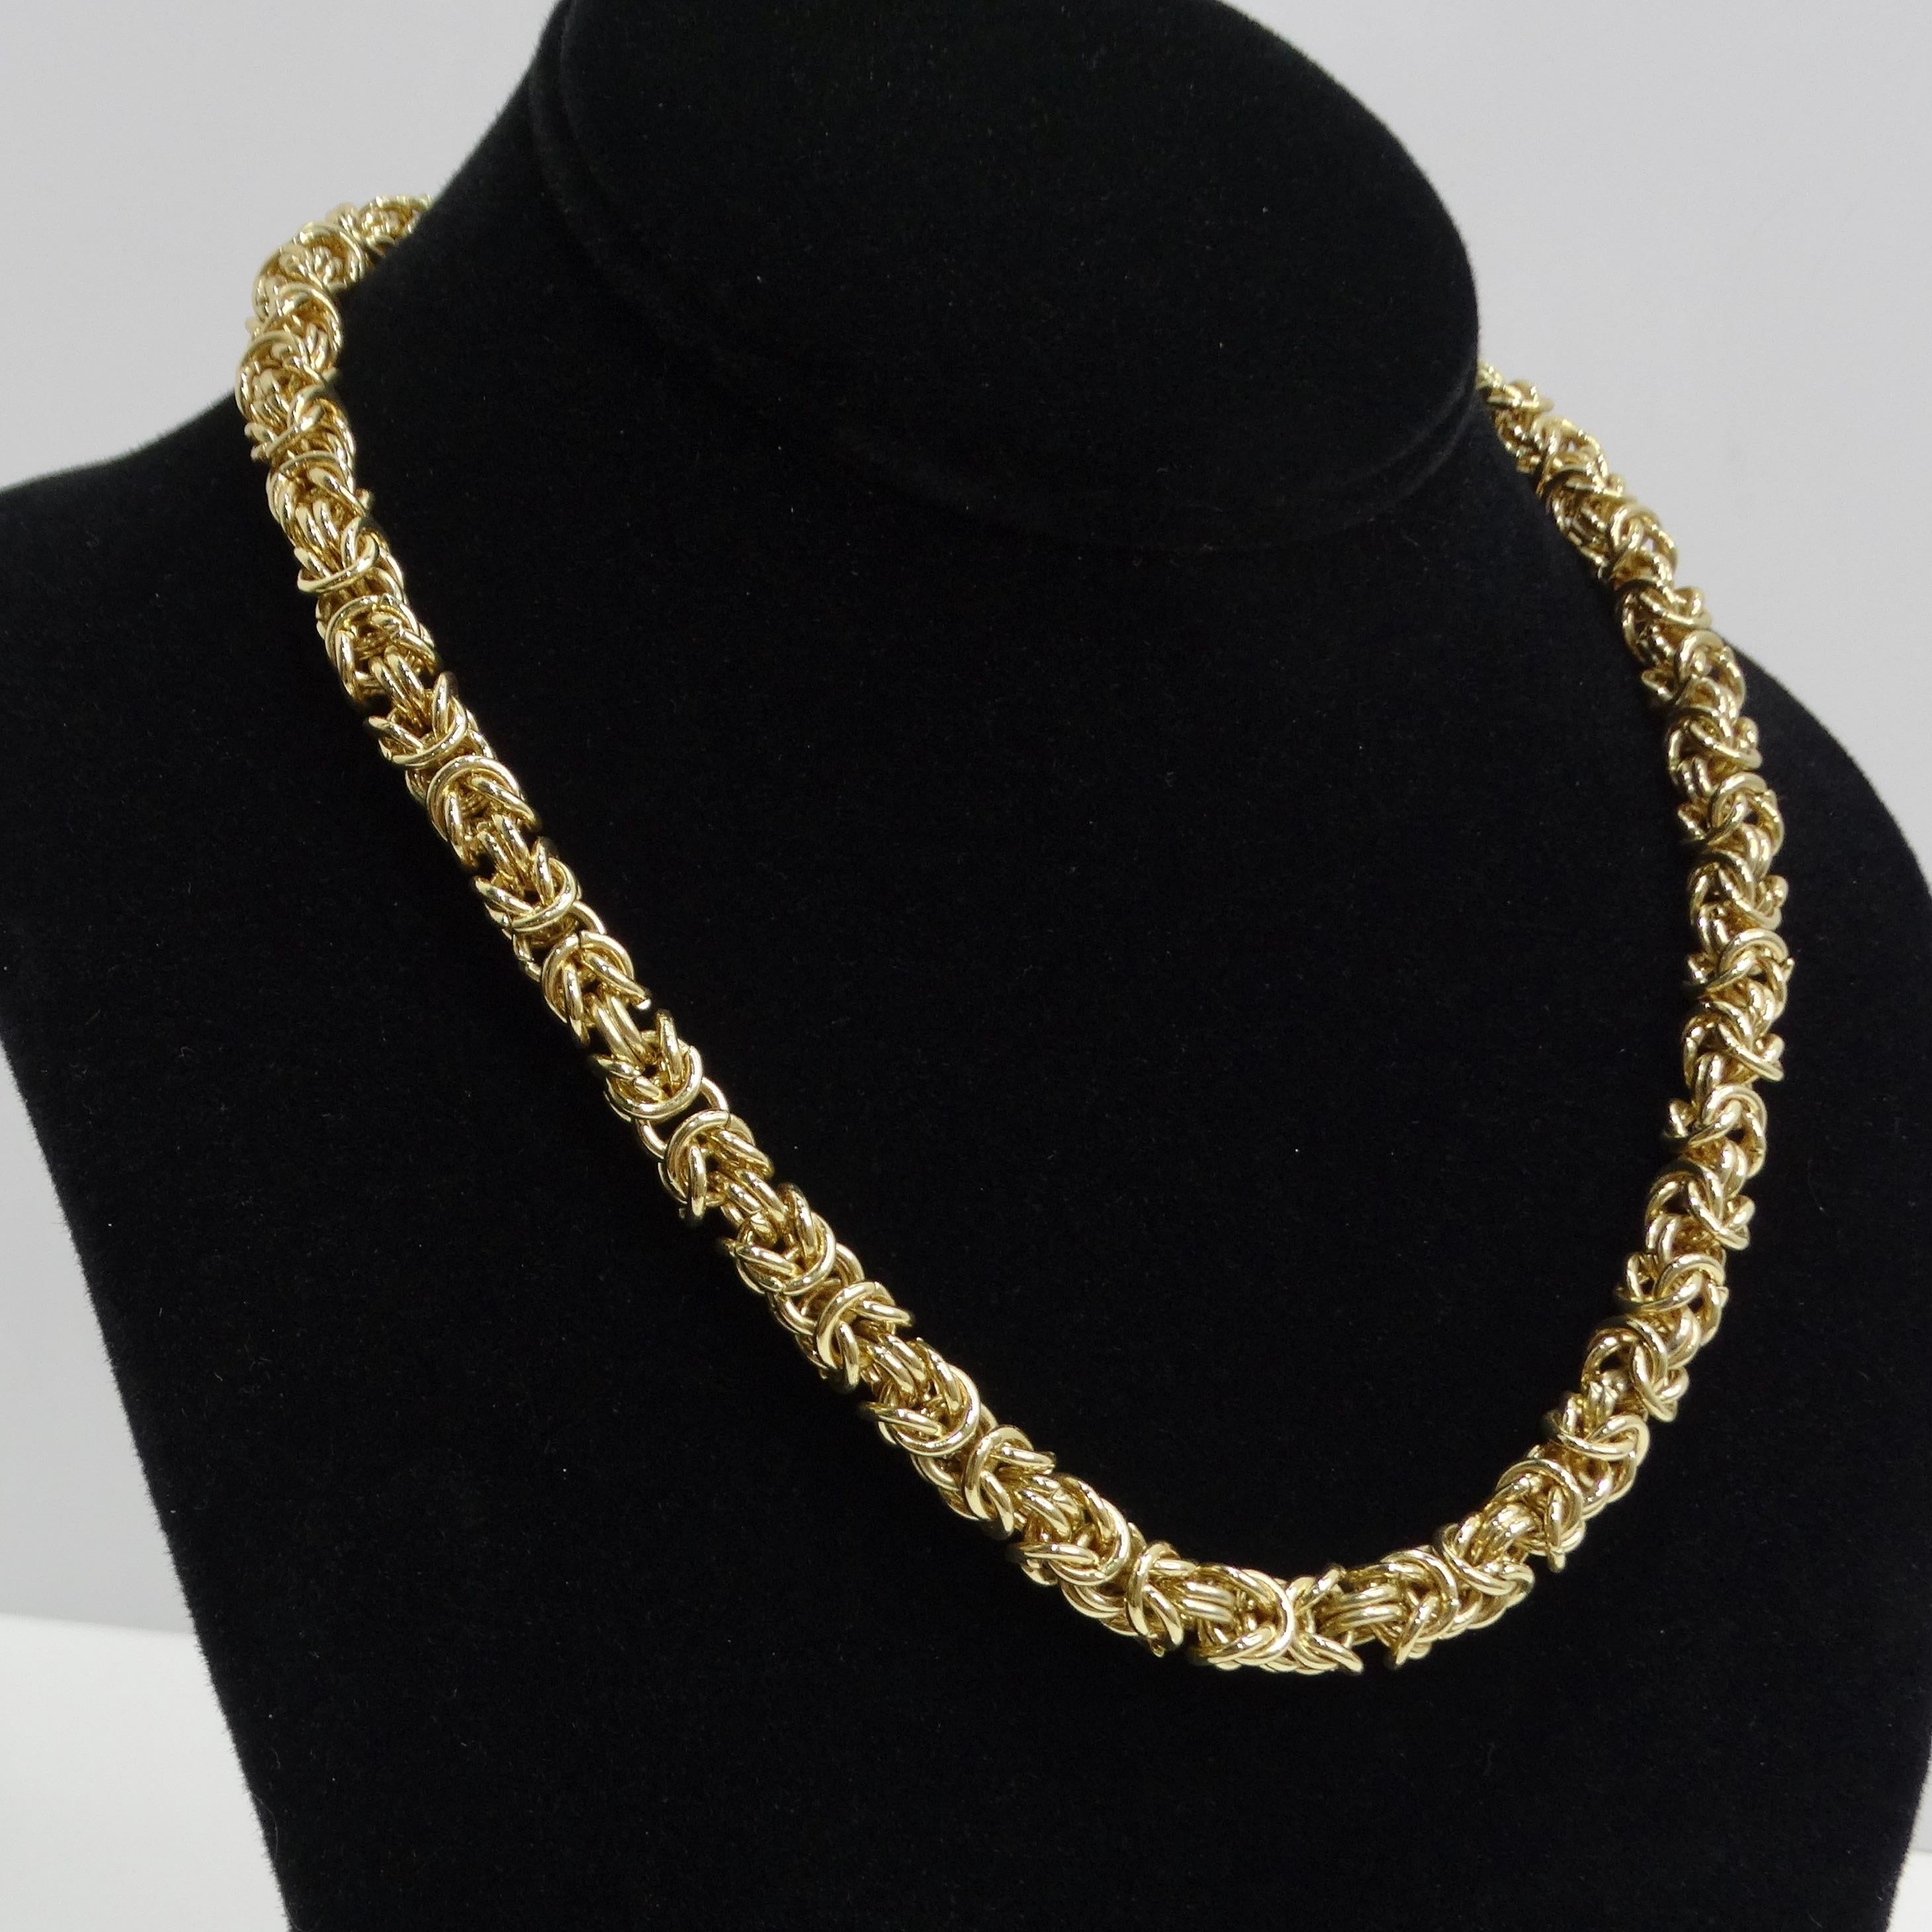 The 18K Gold Plated 1980s Byzantine Chain Necklace is a timeless and elegant piece that embodies the classic Byzantine style. This vintage necklace features intricate woven links, creating a stunning and detailed design that adds depth and texture